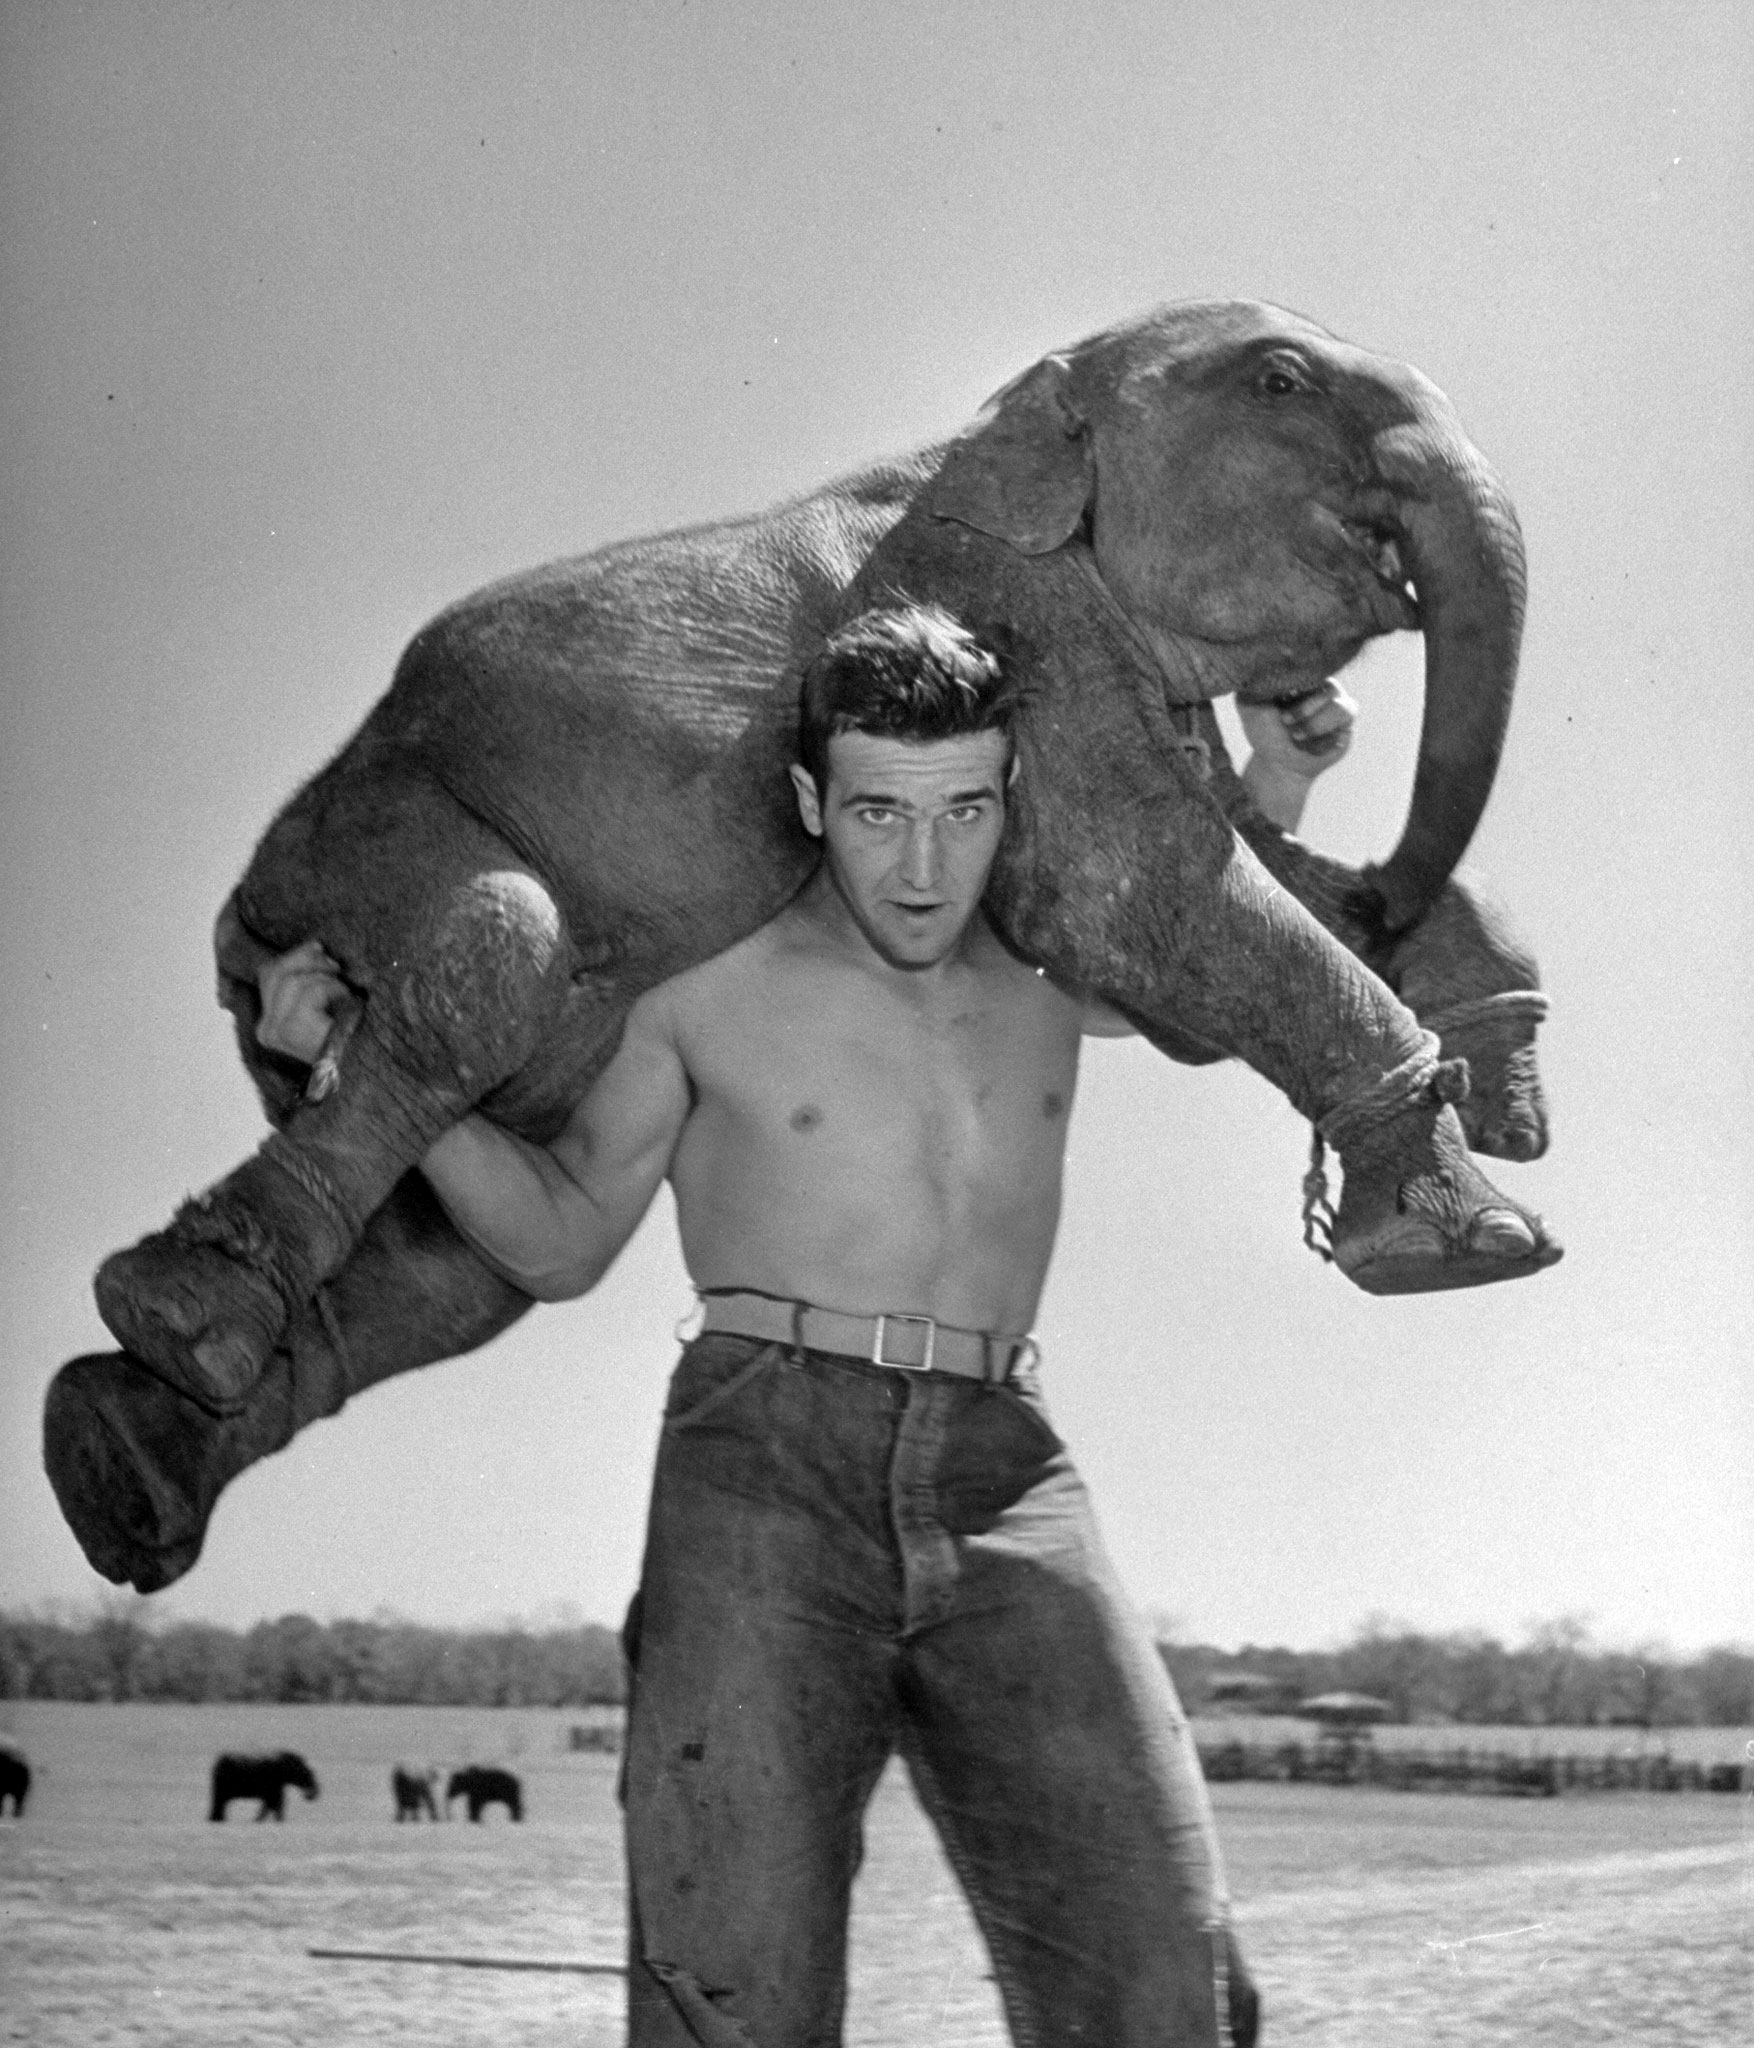 "Butch", baby female Indian elephant in the Dailey Circus, being hoisted on shoulders of circus owner Ben Davenport. Butch weighs around 200 pounds.